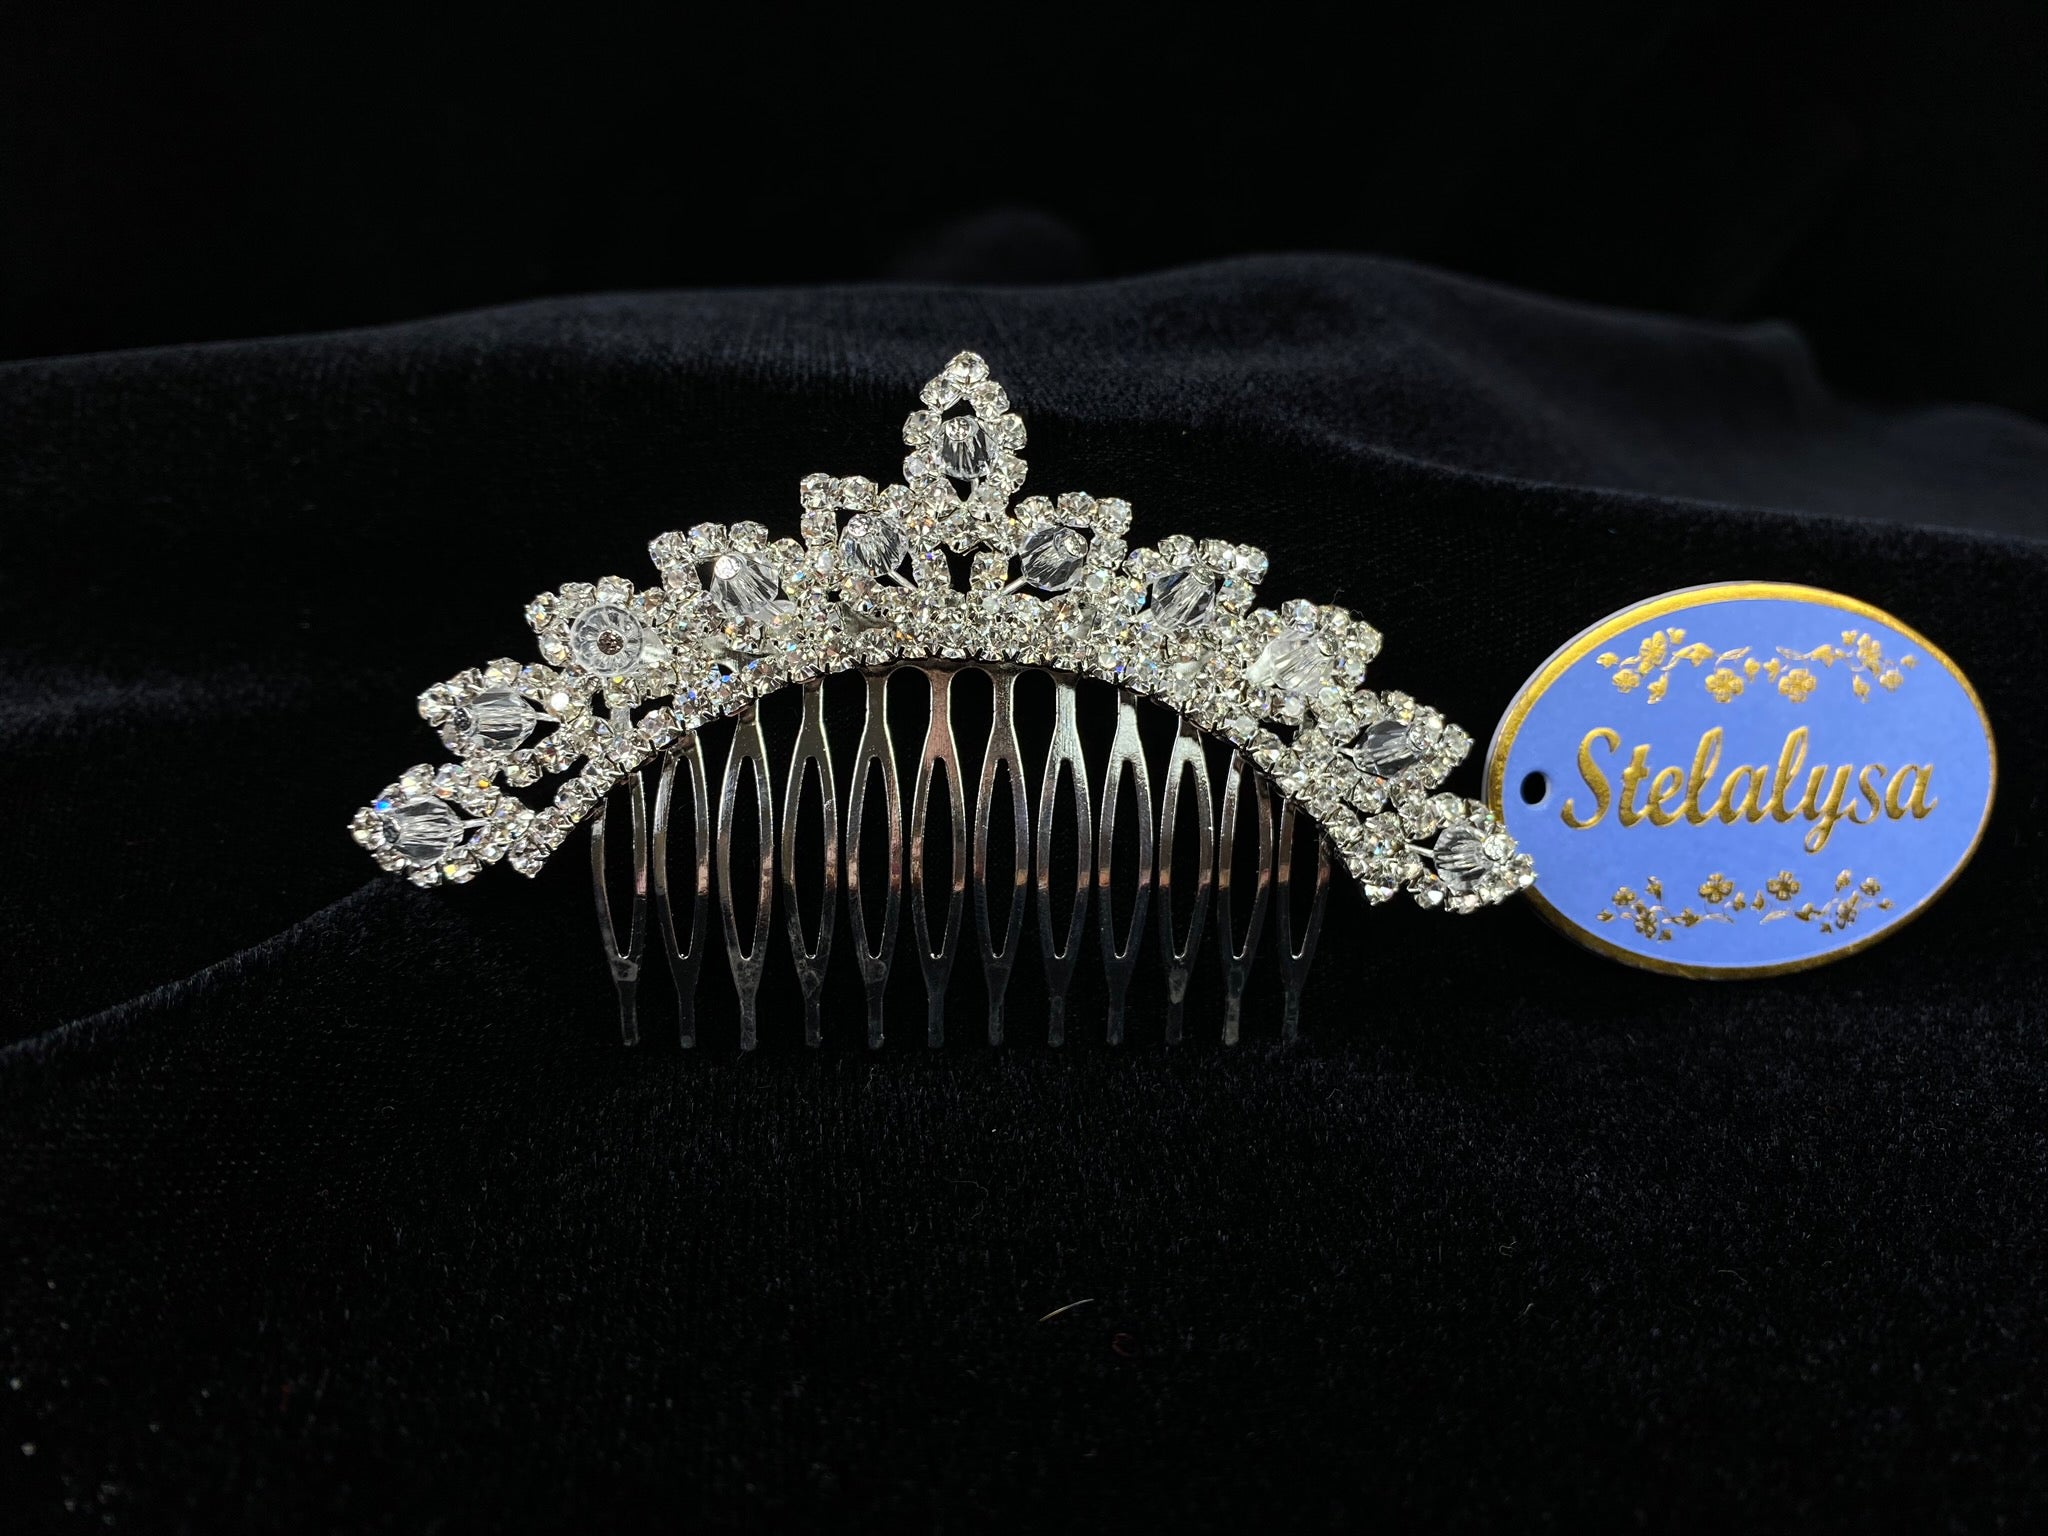 A must have for the First Communion!   Beautiful tiara, covered in gorgeous rhinestones with crystal detailing.  Tiara is 4" across.  Wear this tiara with either a white or ivory veil from our Veil Collection to complete the look for the ceremony.